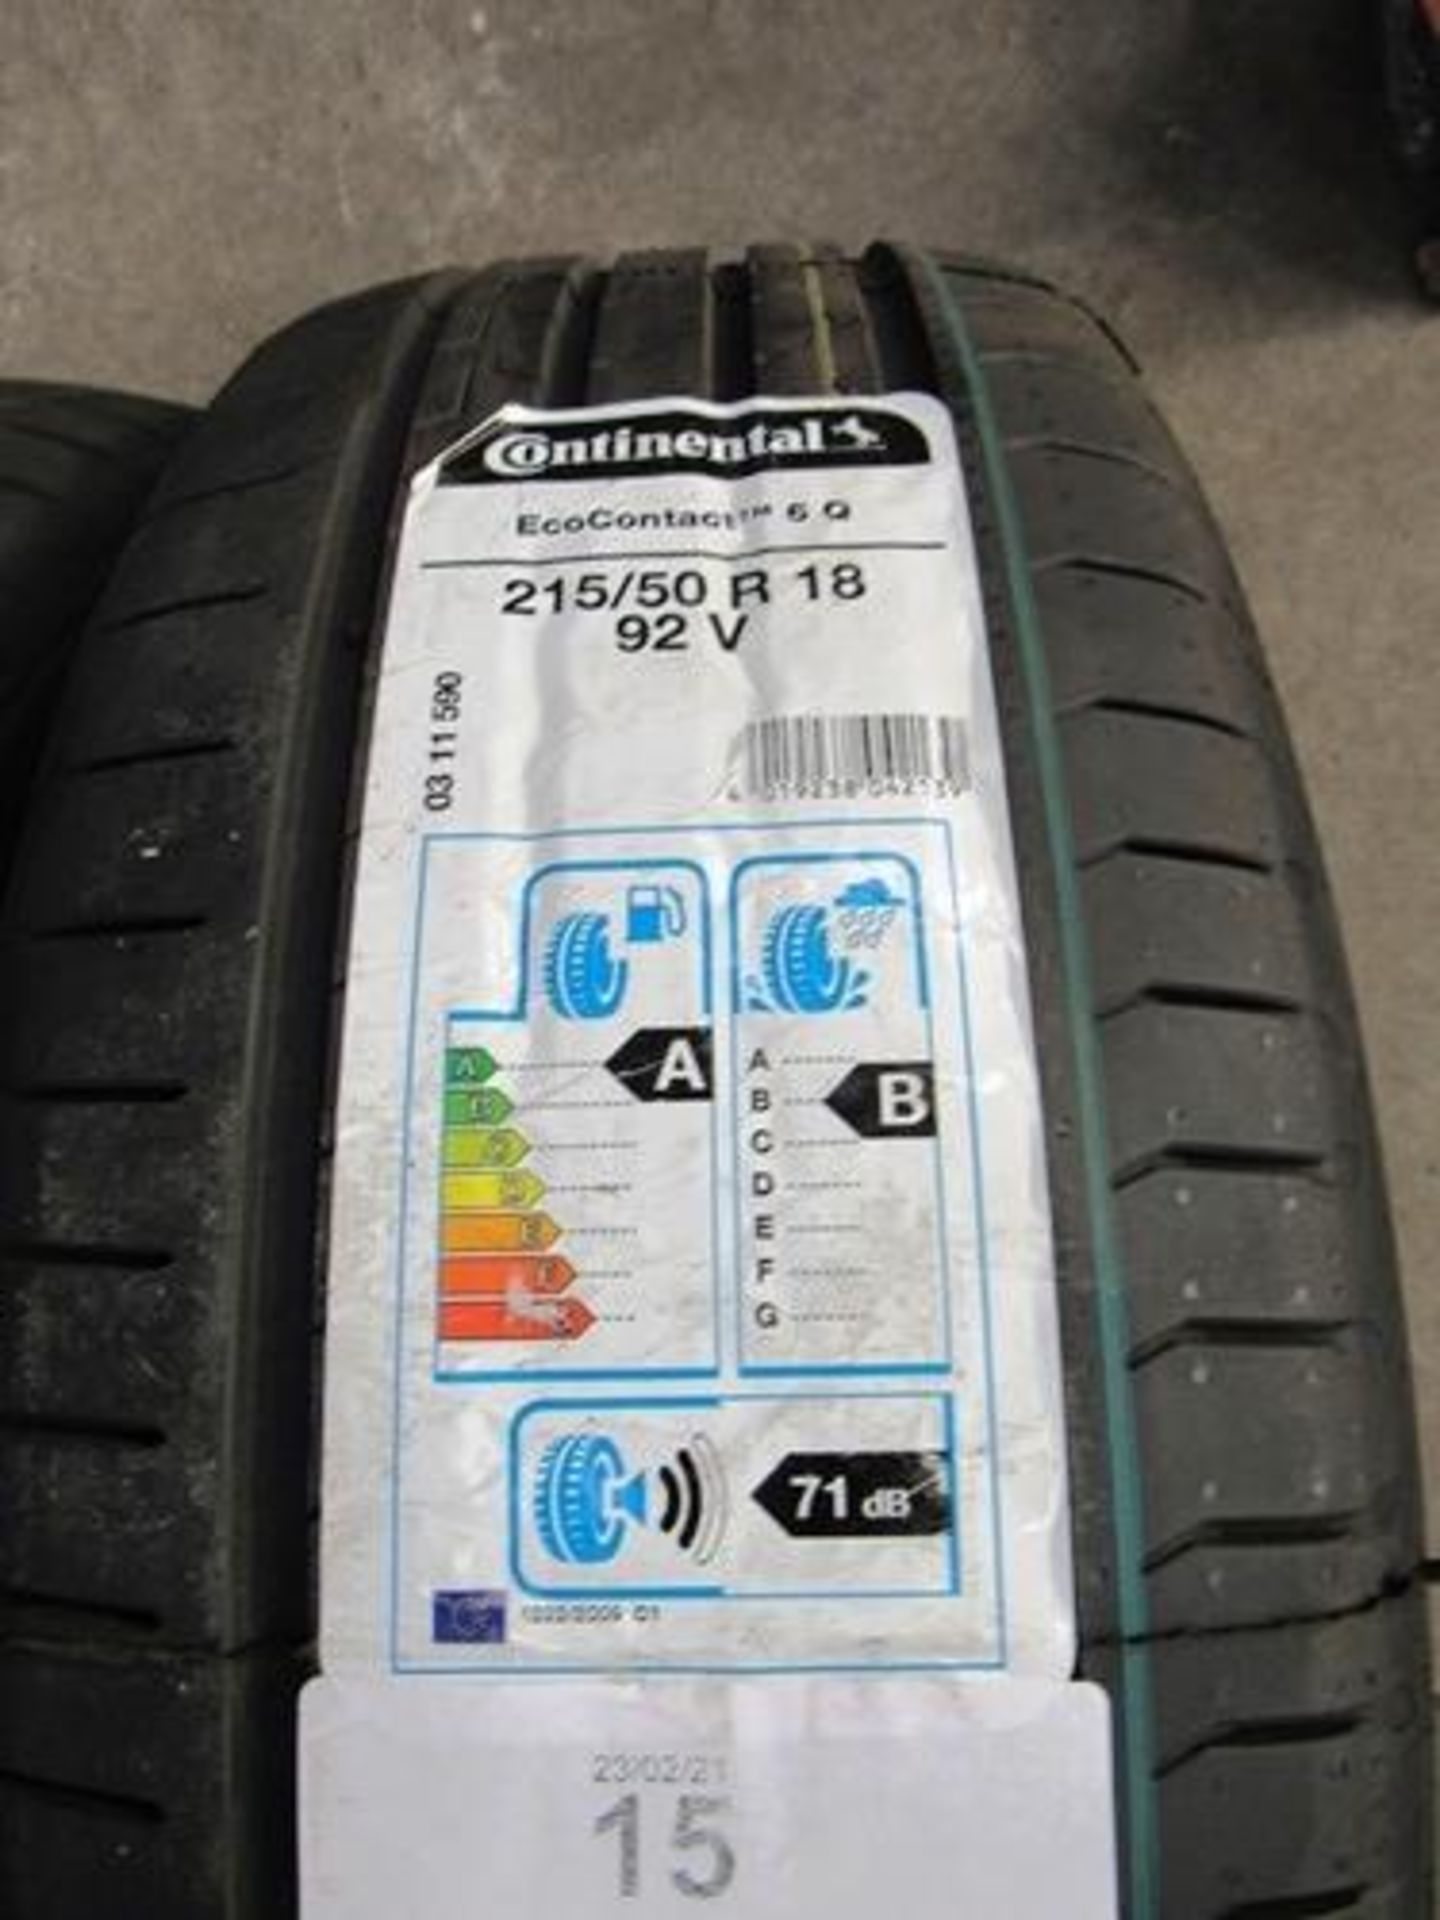 1 x Continental Eco contact 6Q tyre, size 215/50R18 92V - New with label (GS1)